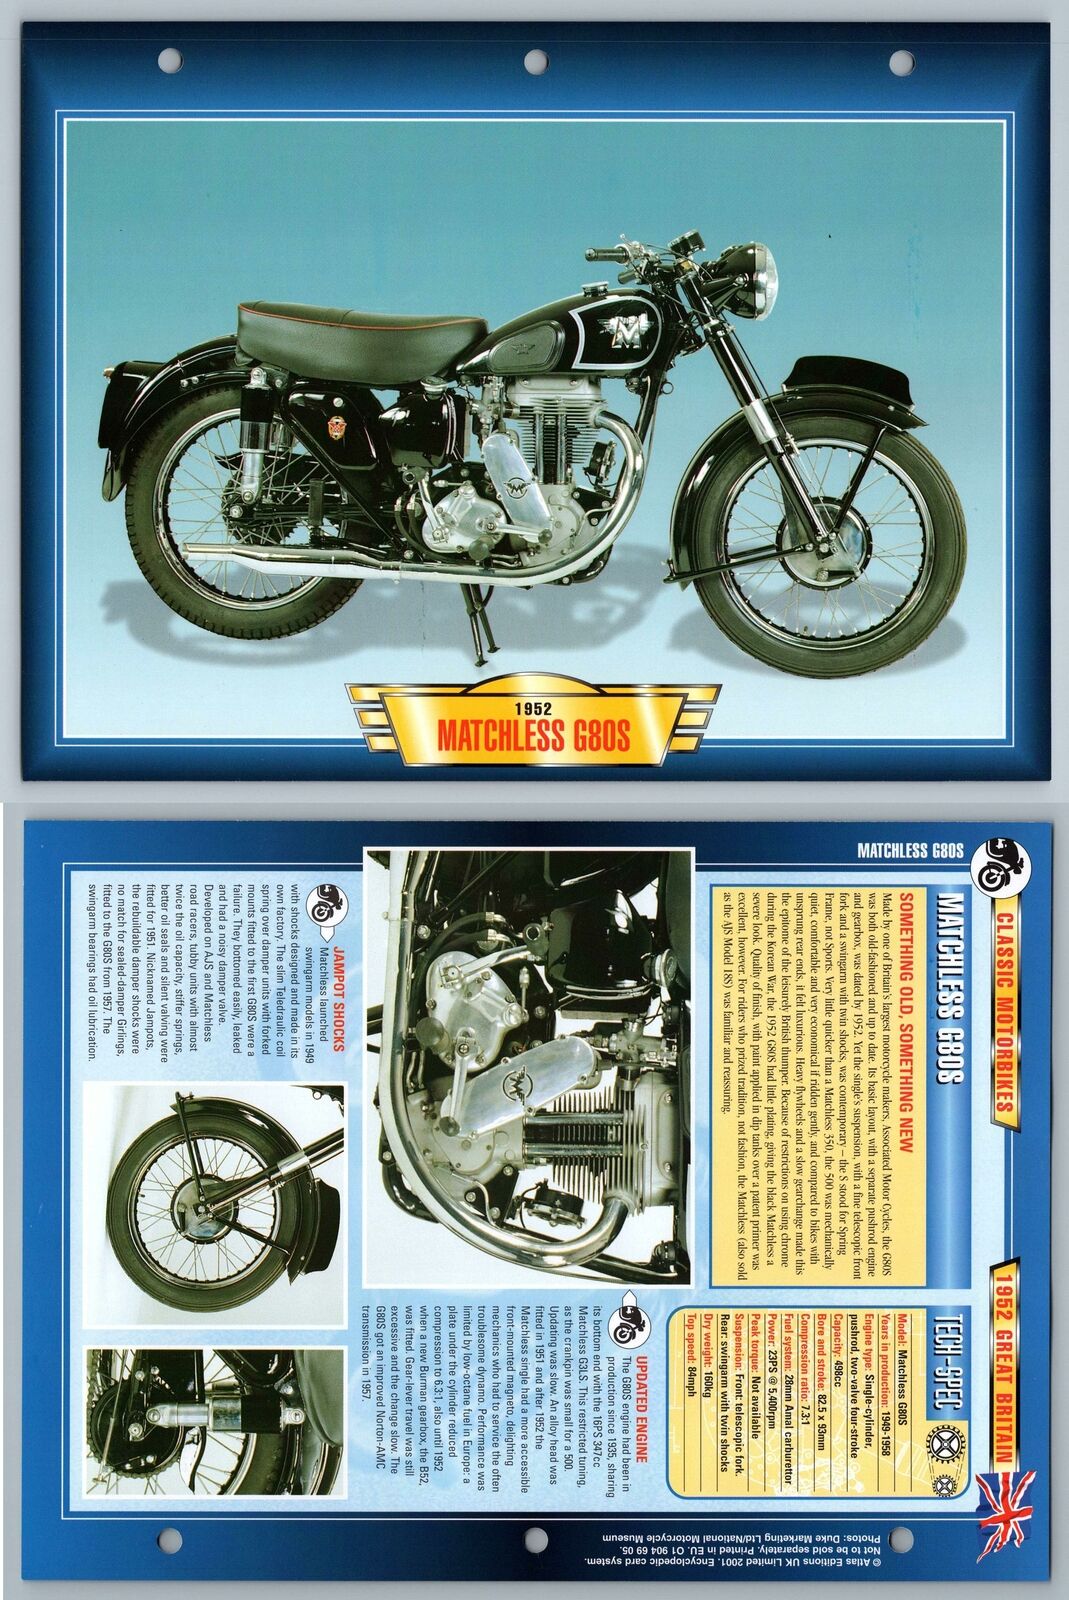 Matchless G80S - 1952 - Classic Motorbikes - Atlas Motorbike Fact File Card